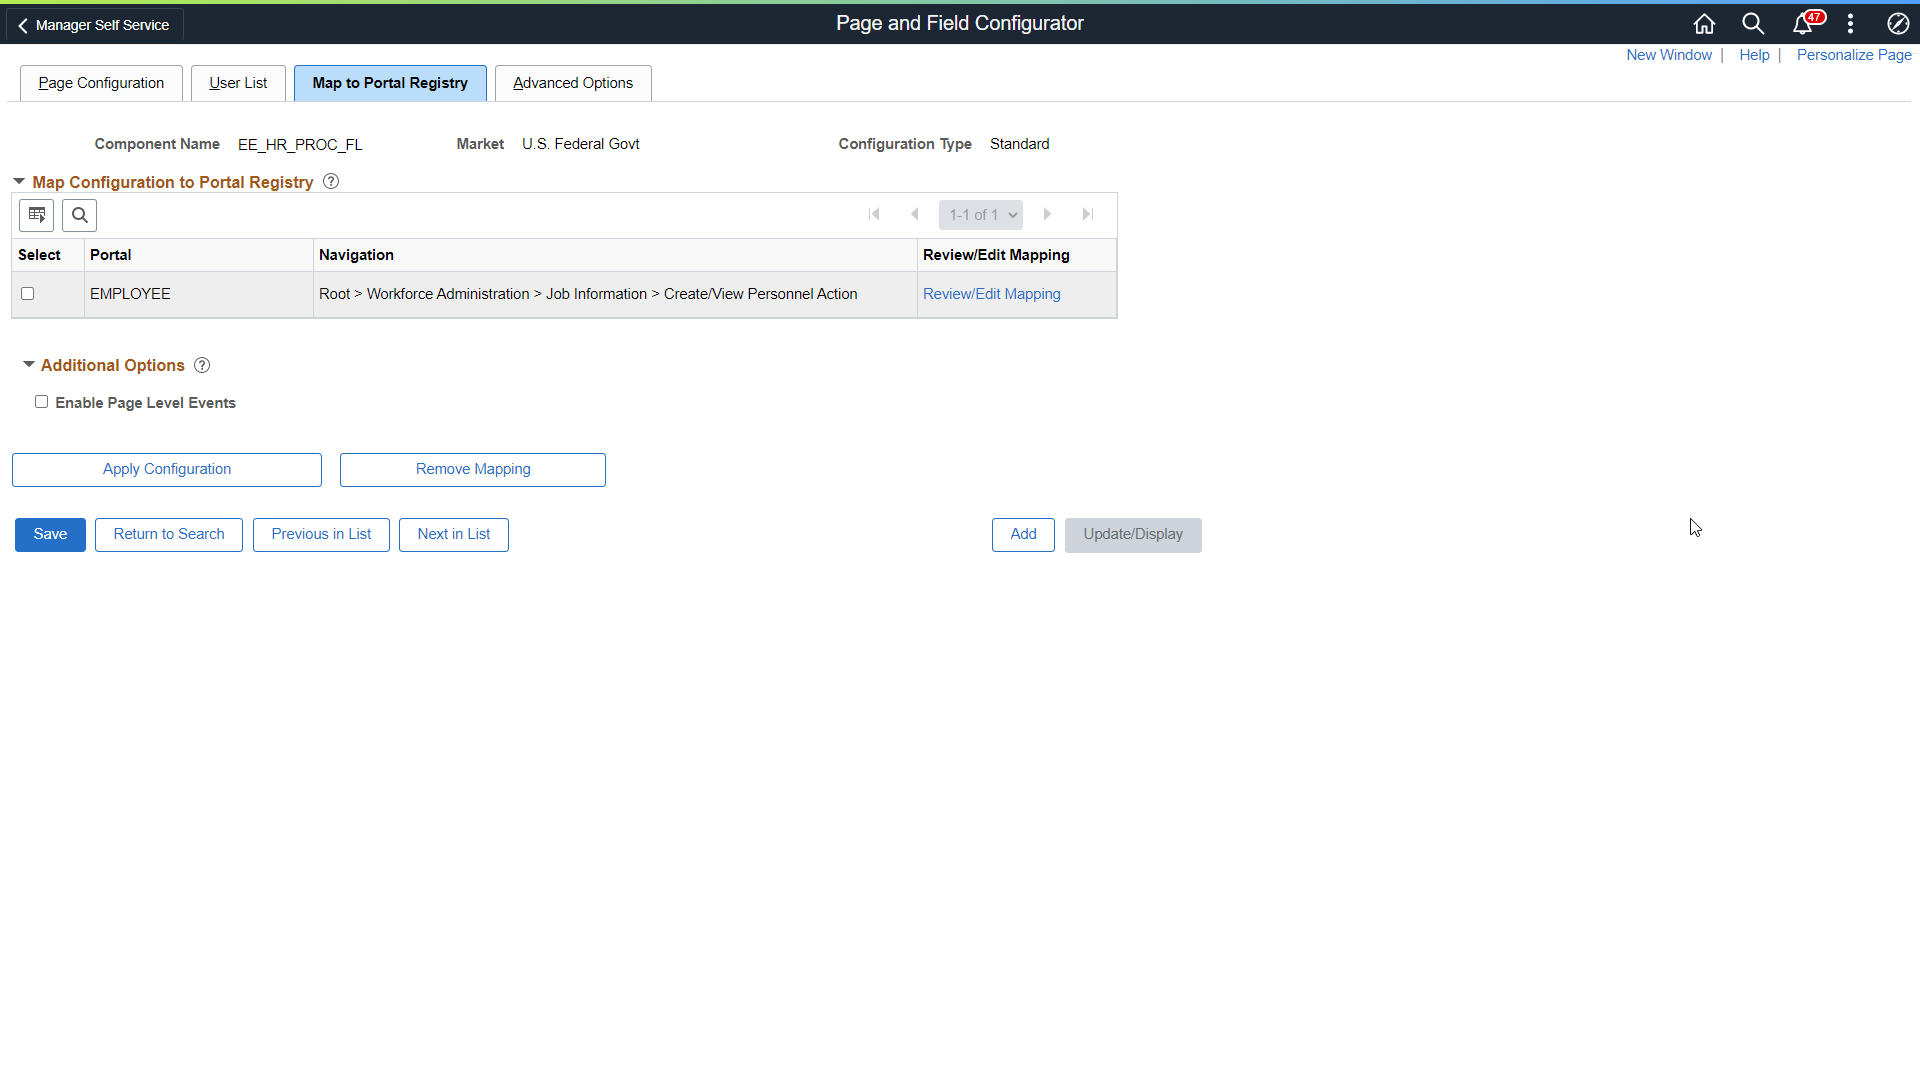 PFC_Map to Portal Registry page